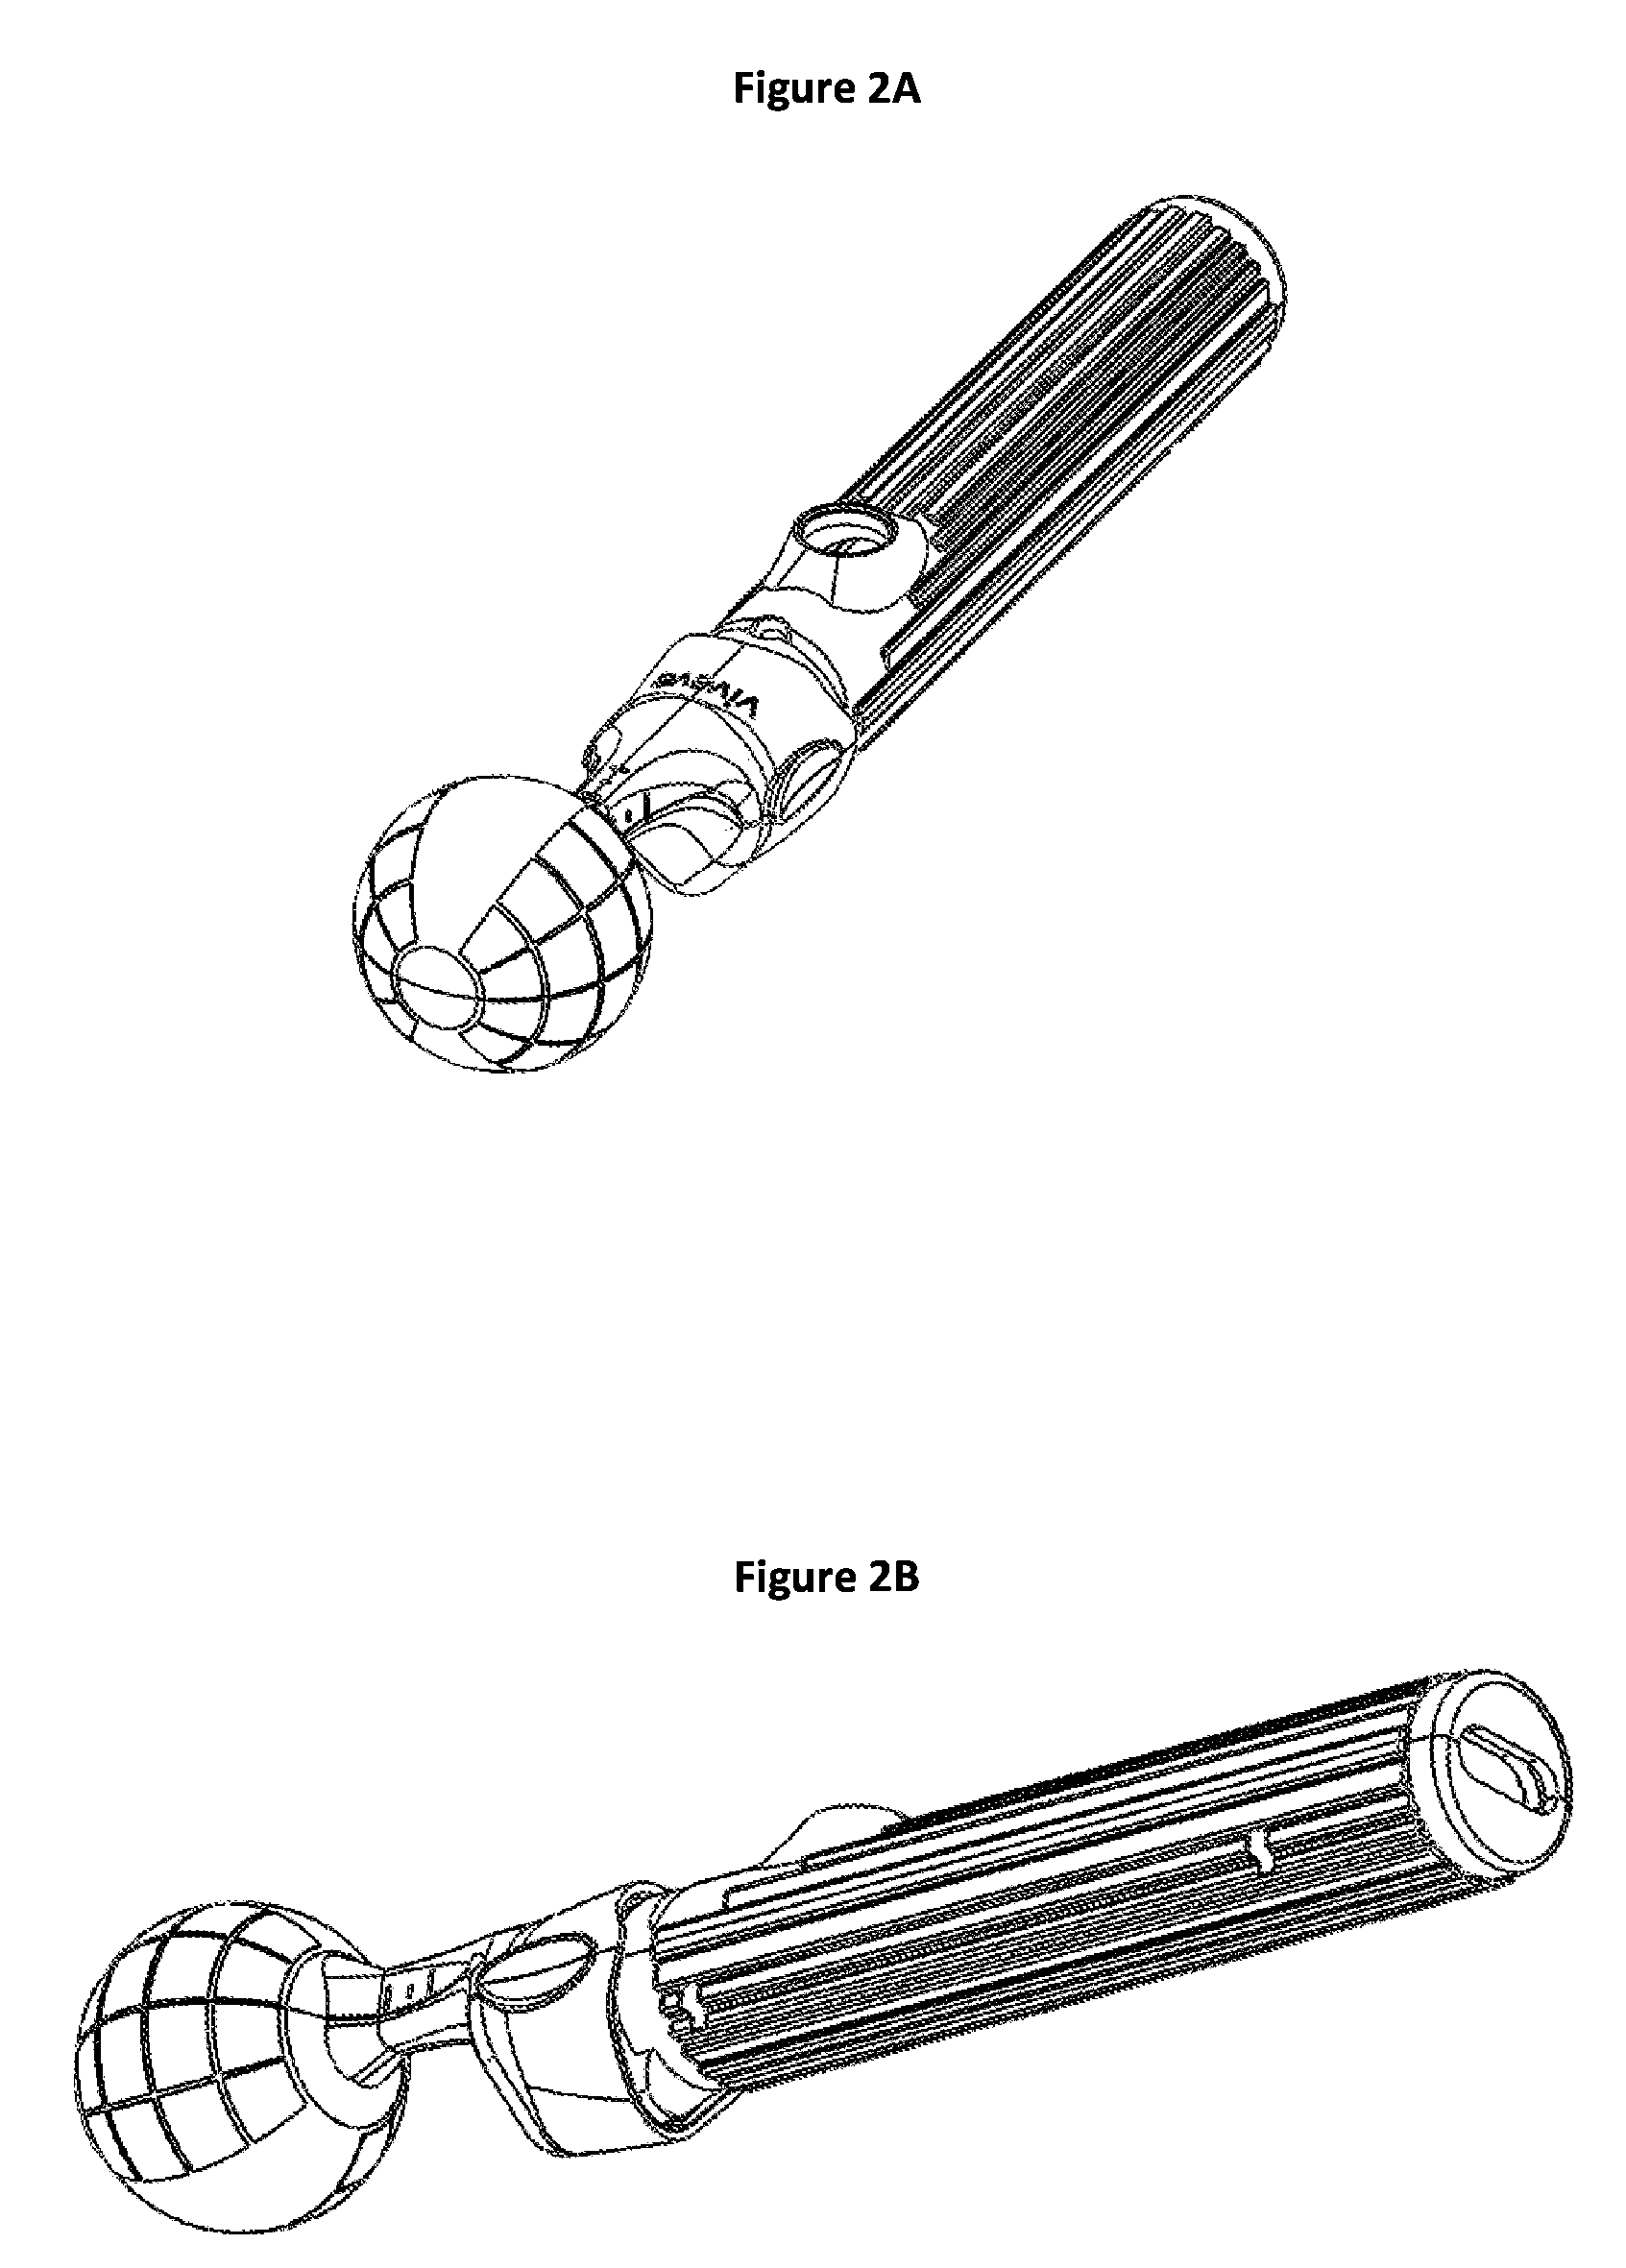 Vaginal remodeling device and method